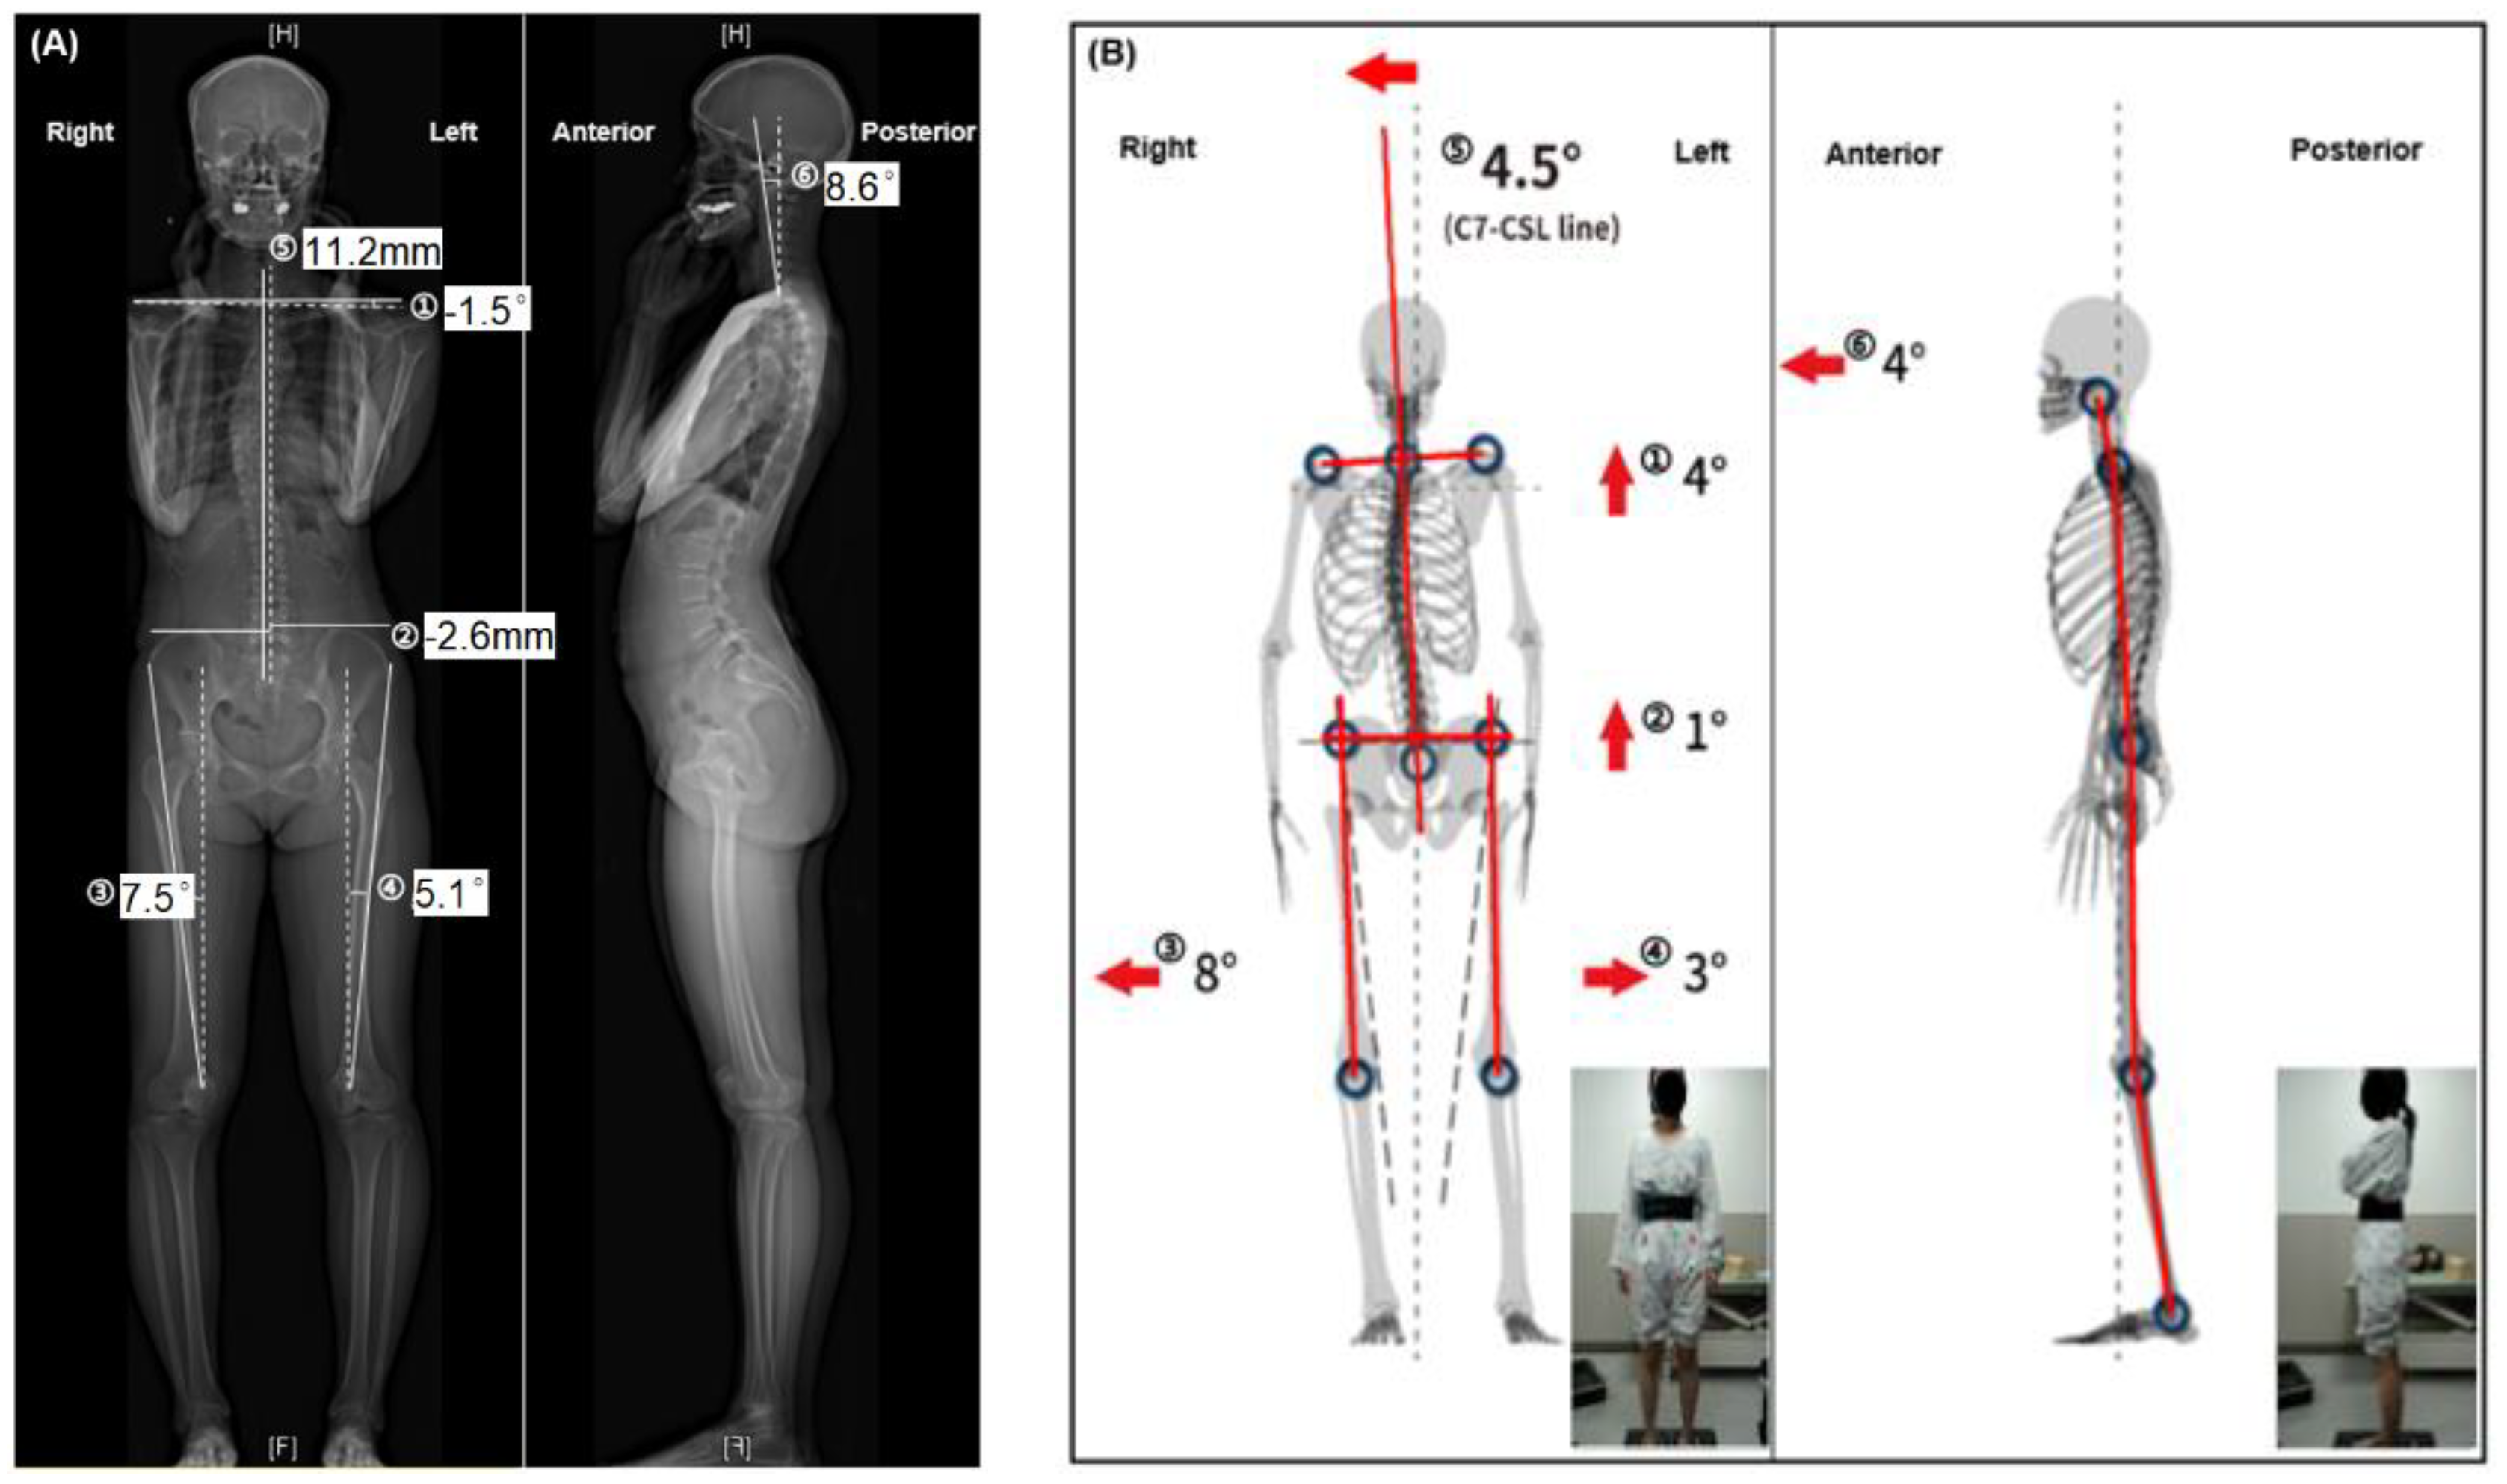 Postural assessment using whole-body EOS® system in the standing